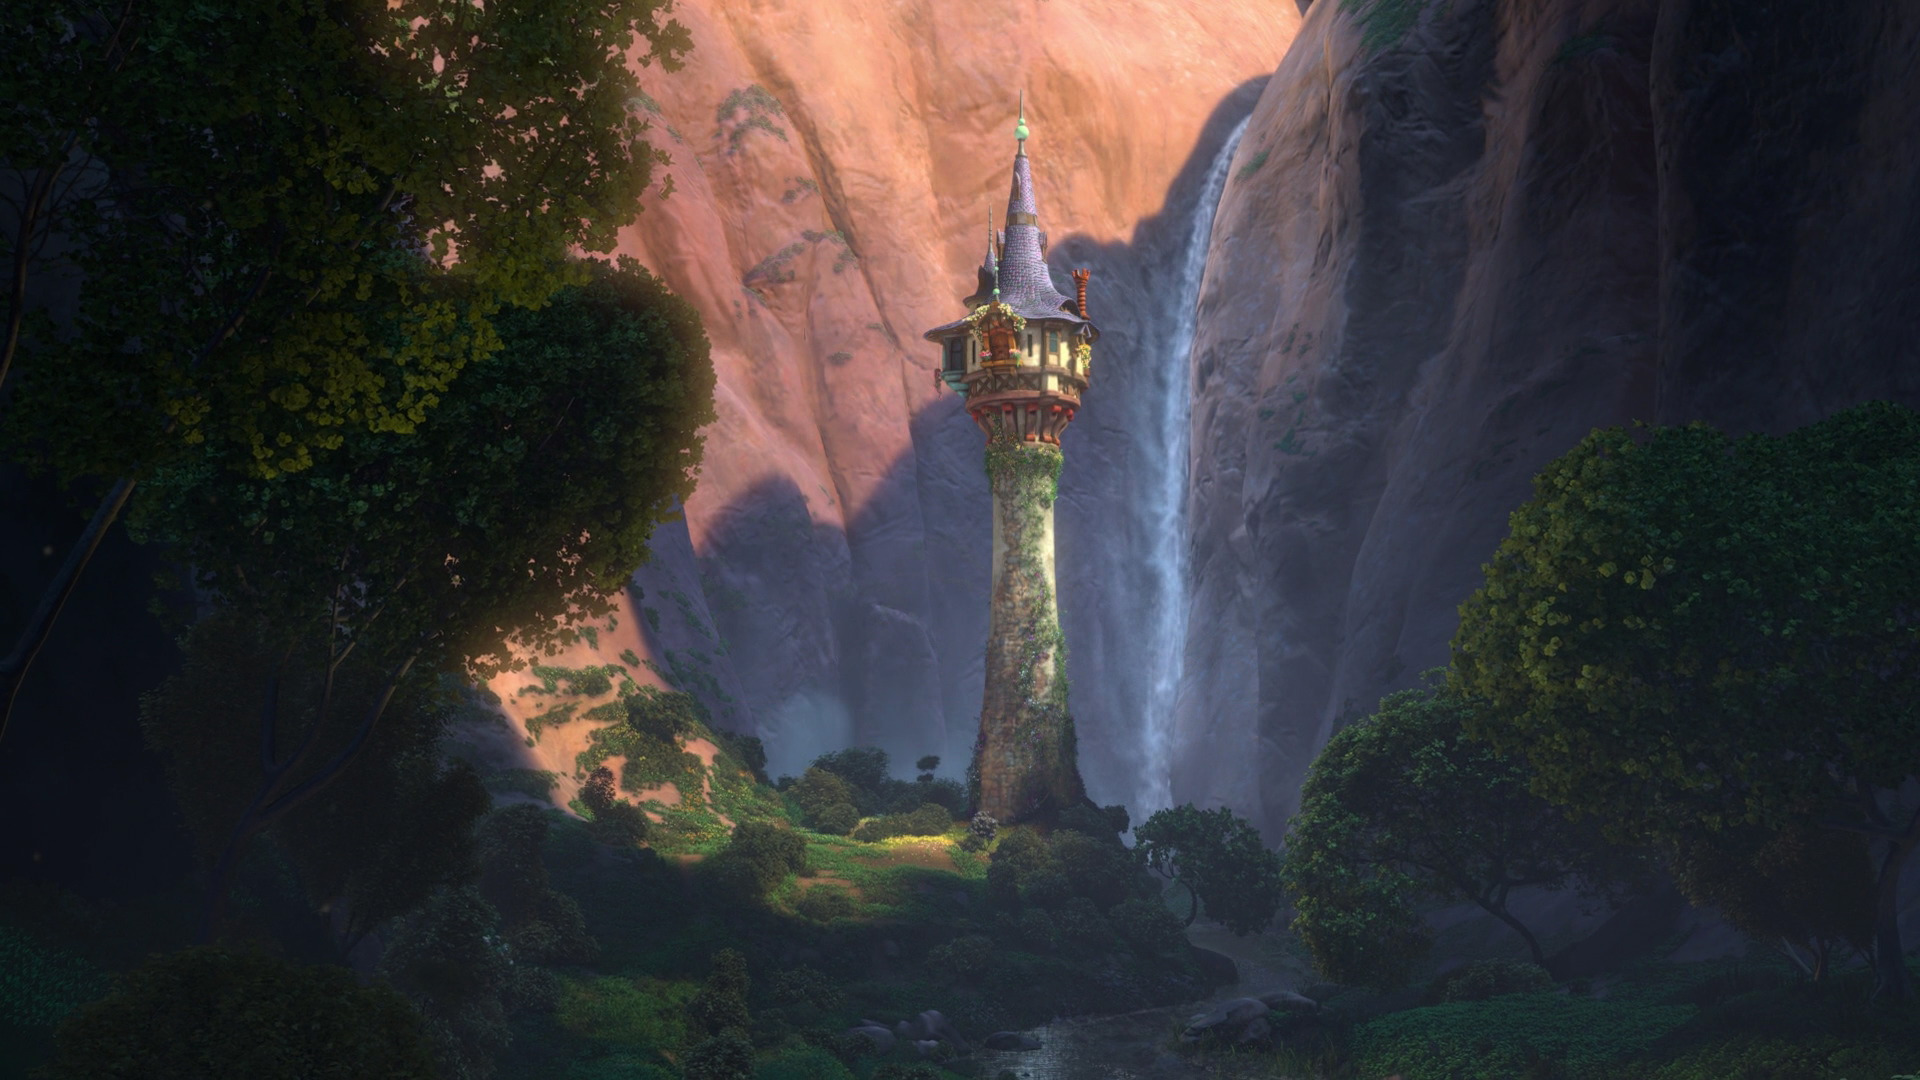 rapunzel_s_tower_by_frie_ice-d6pszf9.jpg